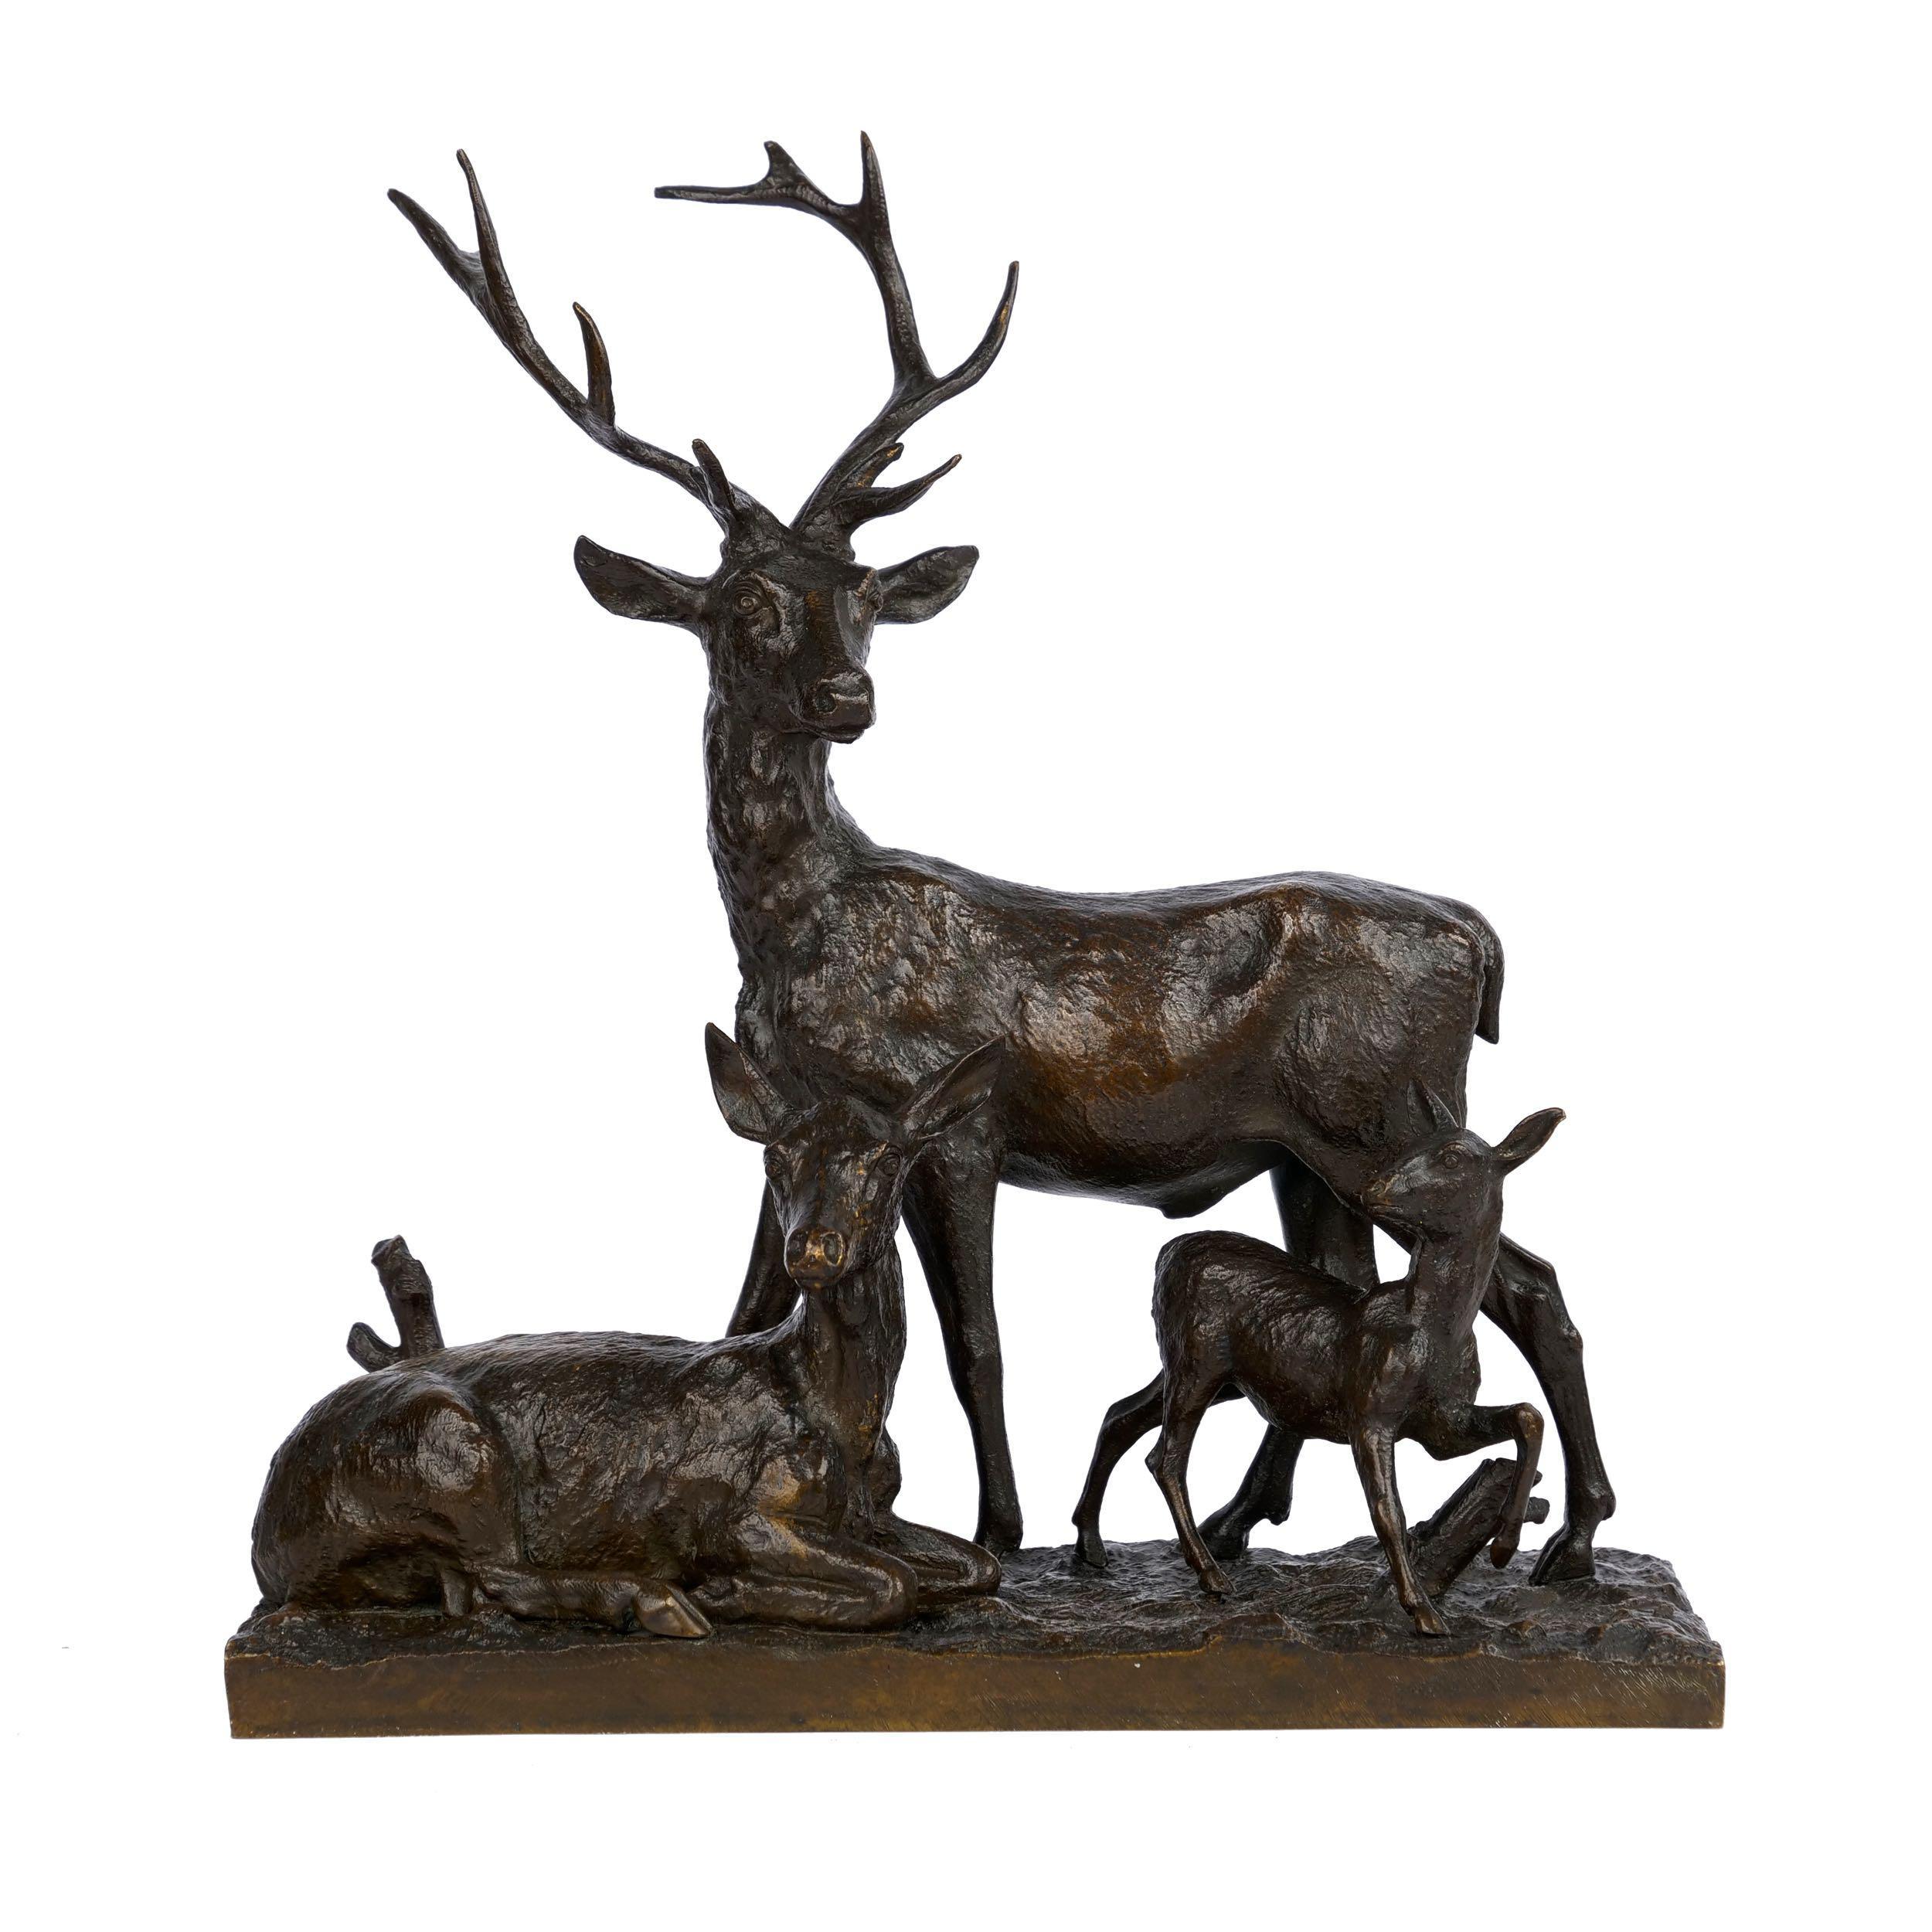 A finely executed lifetime cast depicting a Family of Deer, the work is immediately recognizable as the product of Fratin's vivid imagination. The length of each deer's body in this peaceful group is beautifully textured and chaotic, Fratin's